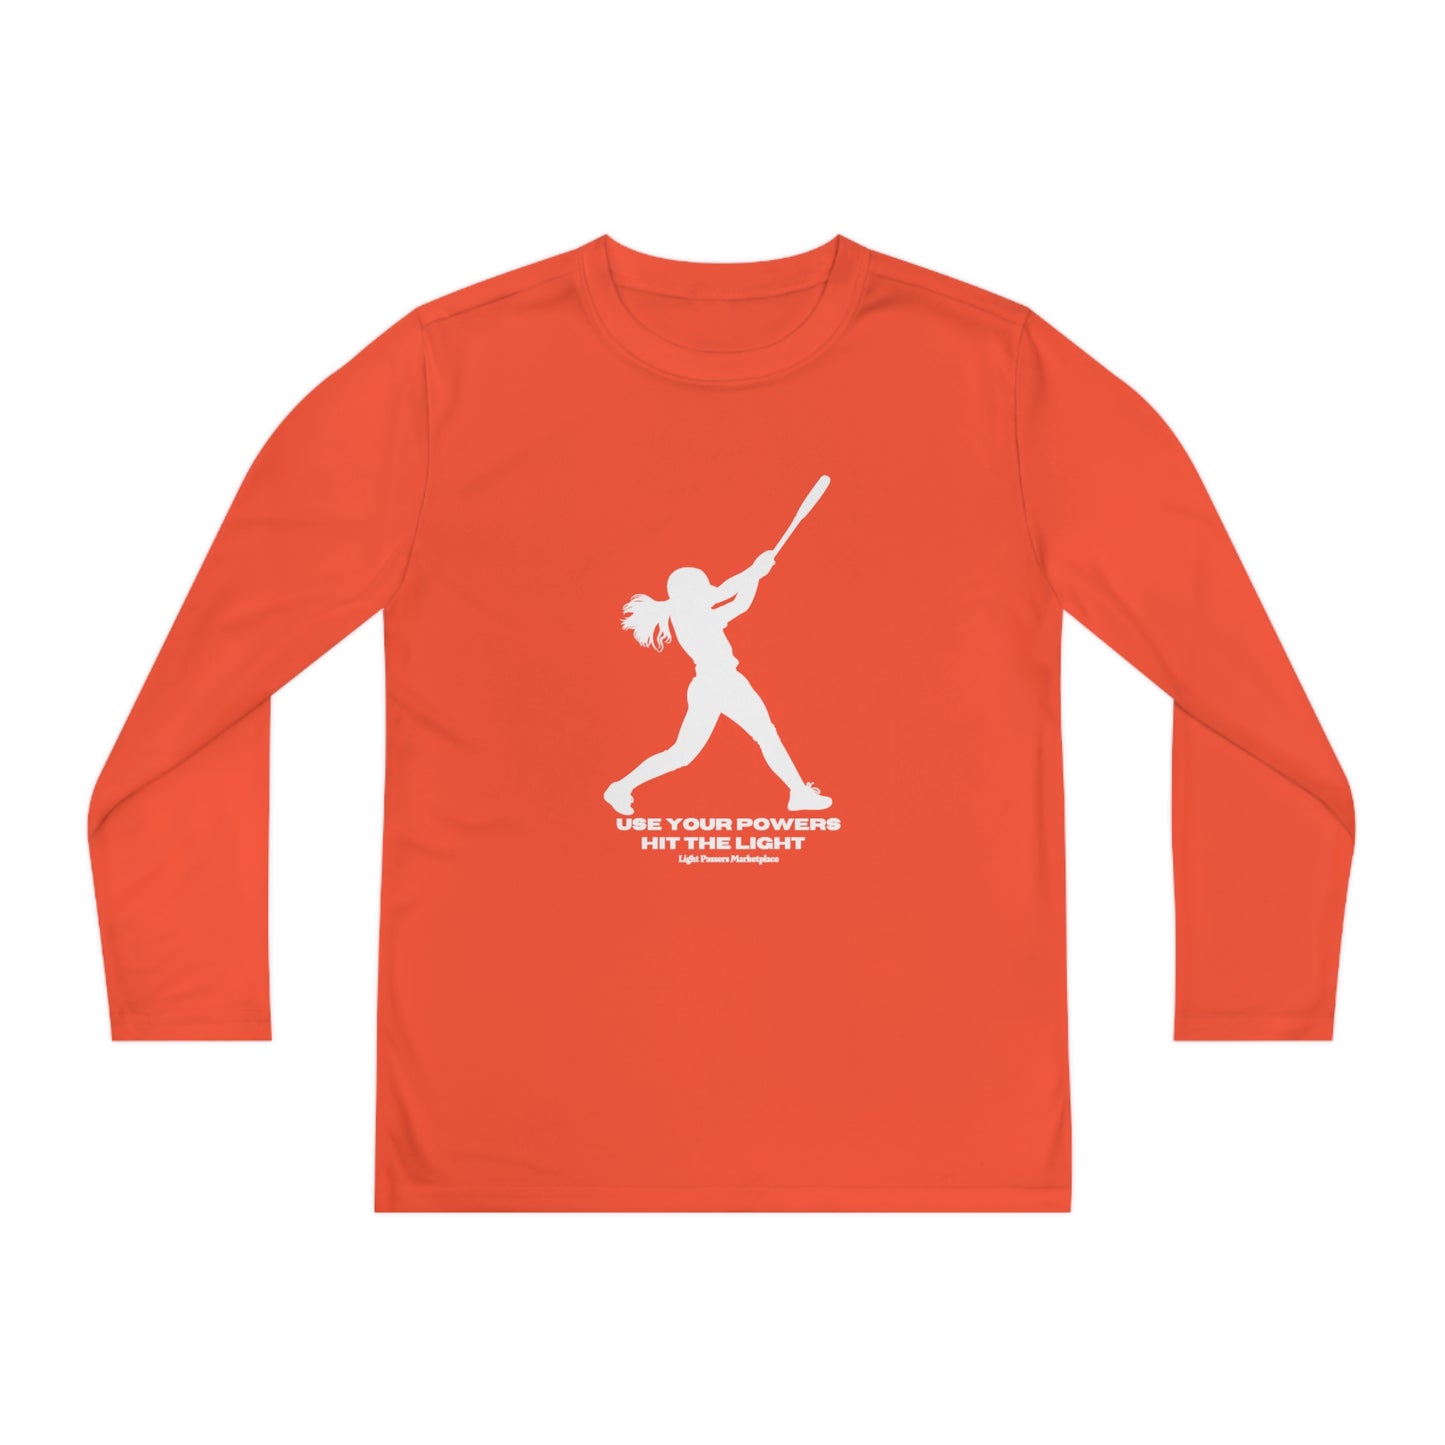 A youth long sleeve shirt featuring a girl swinging a bat silhouette. Made of moisture-wicking polyester, lightweight, and breathable for active kids. Ideal for creating unique wardrobe staples.